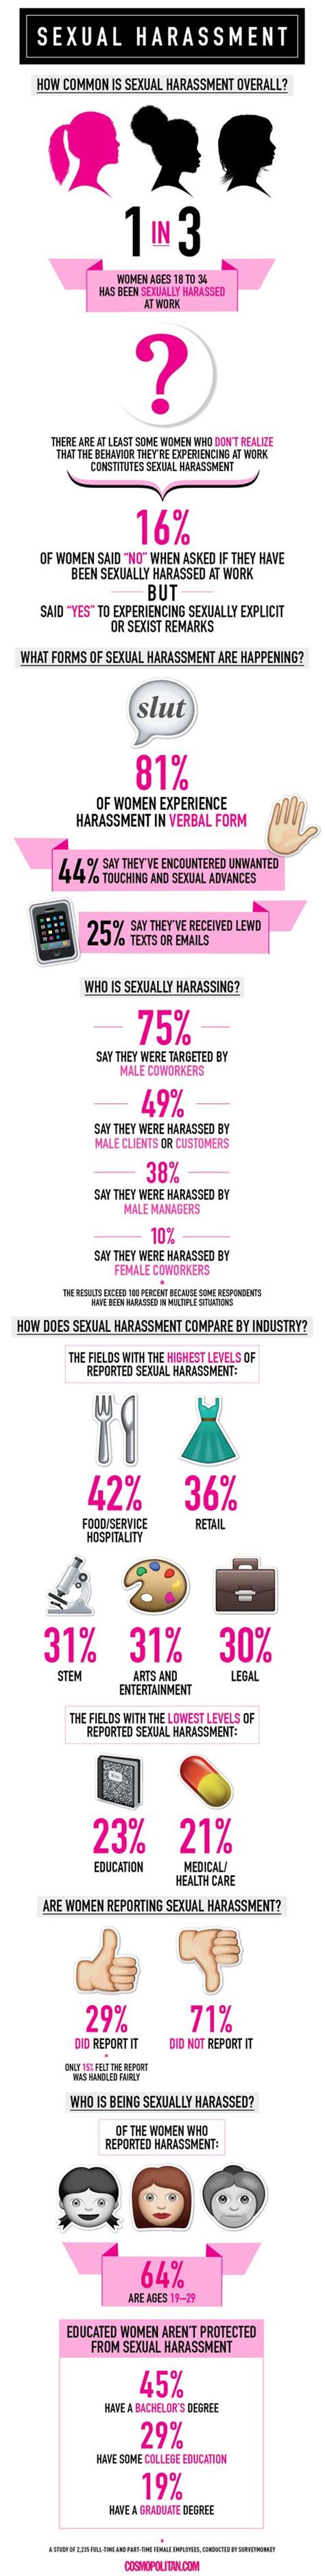 Survey 1 In 3 Women Has Been Sexually Harassed At Work